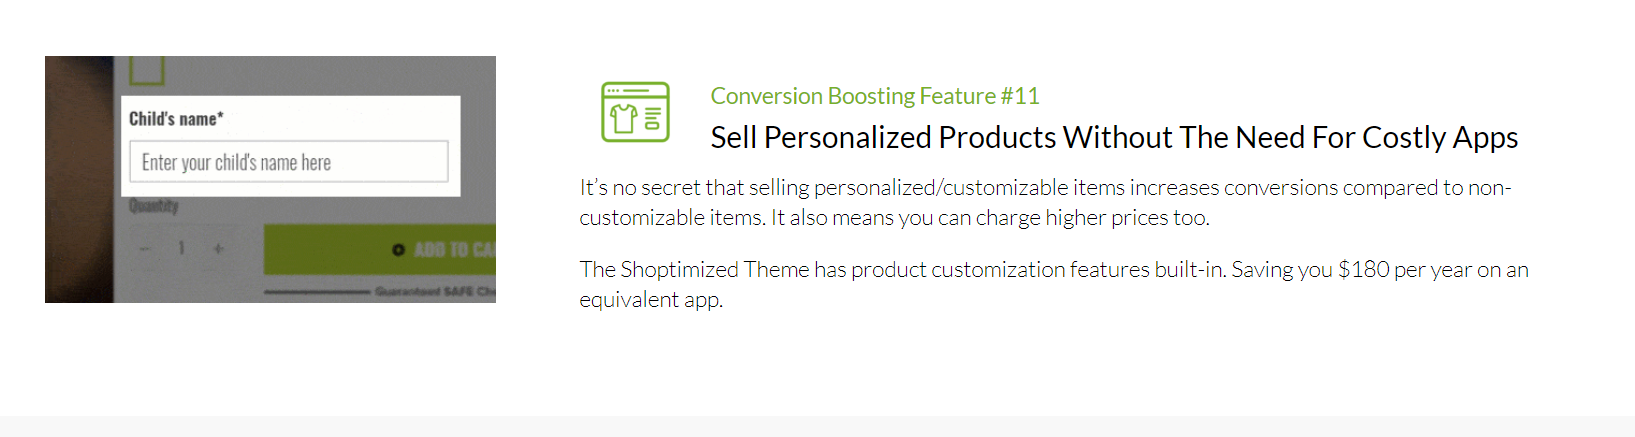 Shoptimized - Sell Personalized